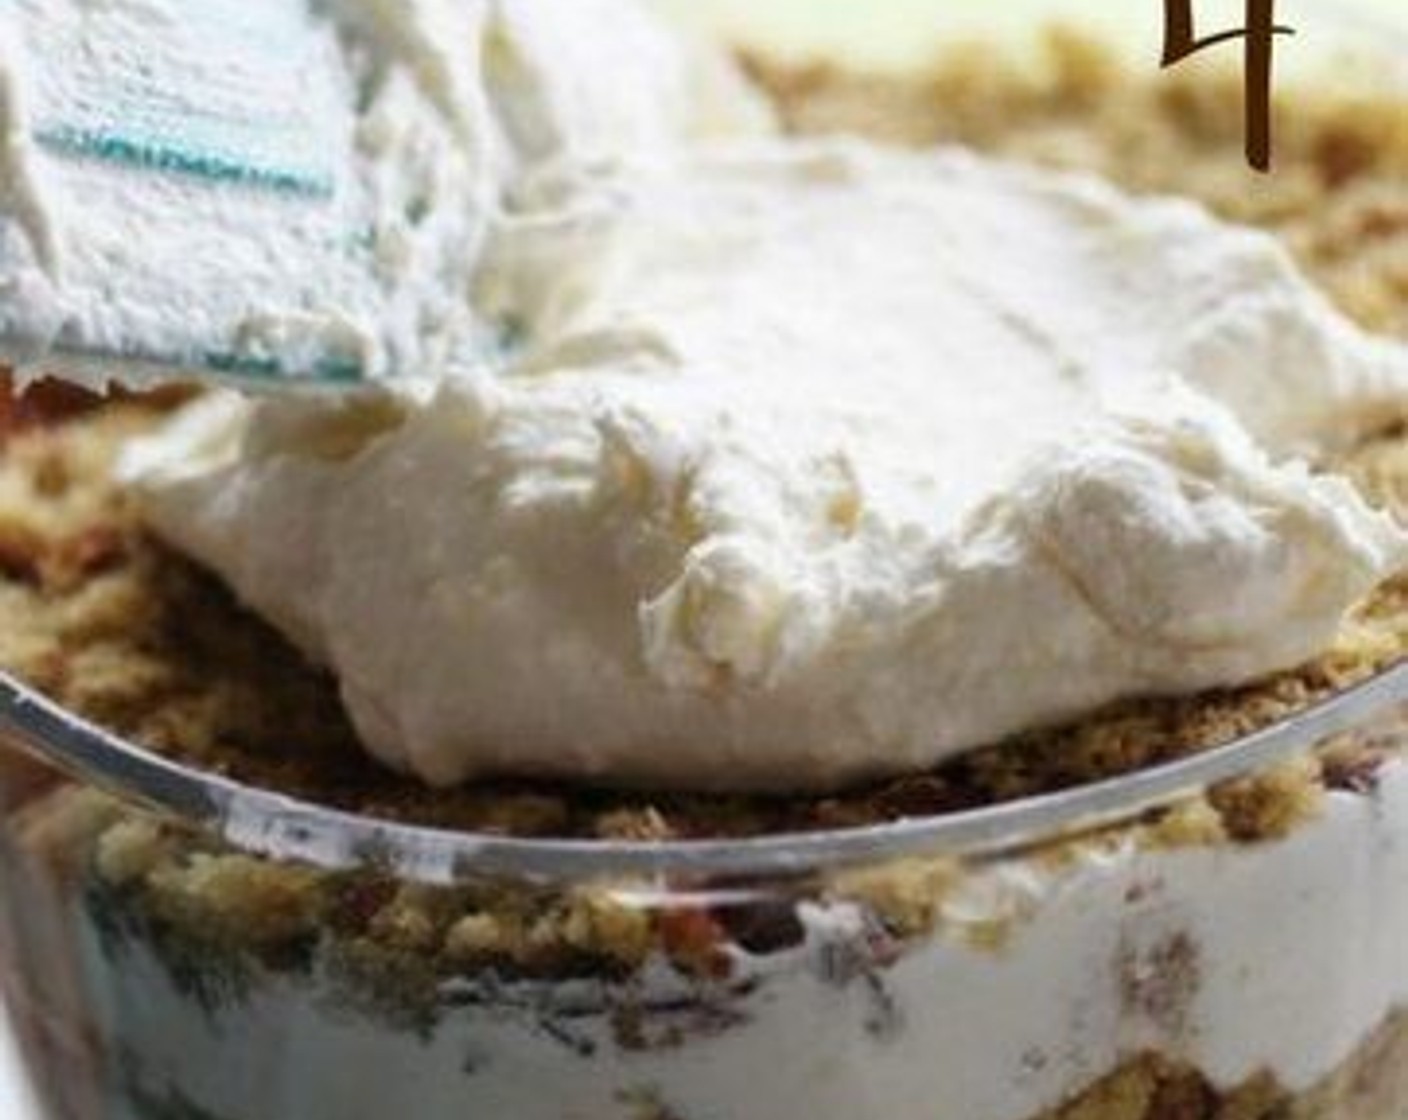 step 6 In a large clear punch bowl or trifle dish, assemble the punch bowl cake in layers. Start with a layer of cake crumbs, then top with the whipped cream mixture, and a layer of crumbled peanut butter cups.